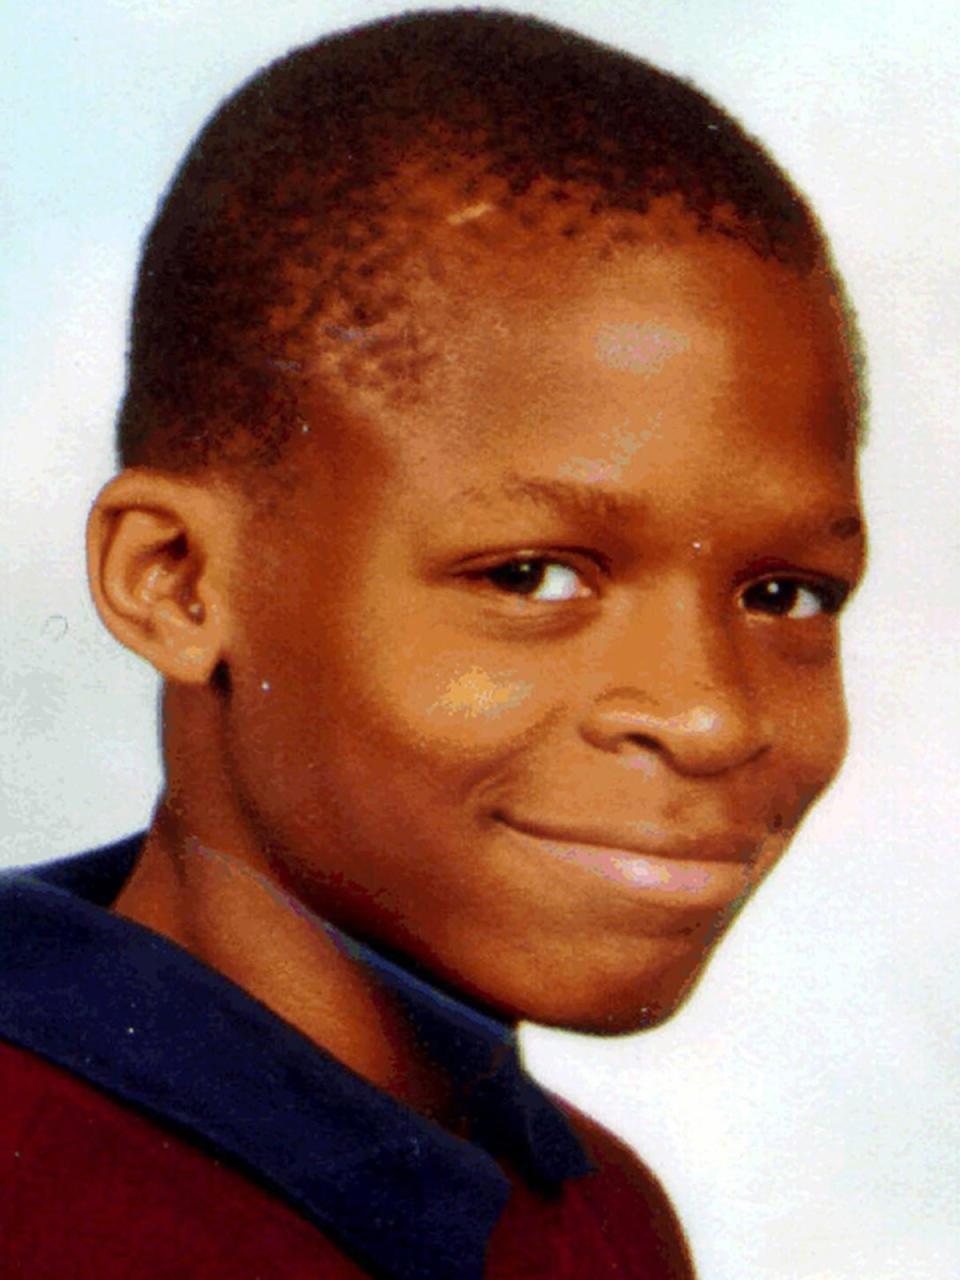 Damilola Taylor was found bleeding to death in a stairwell near his home in Peckham in 2000 (PA)